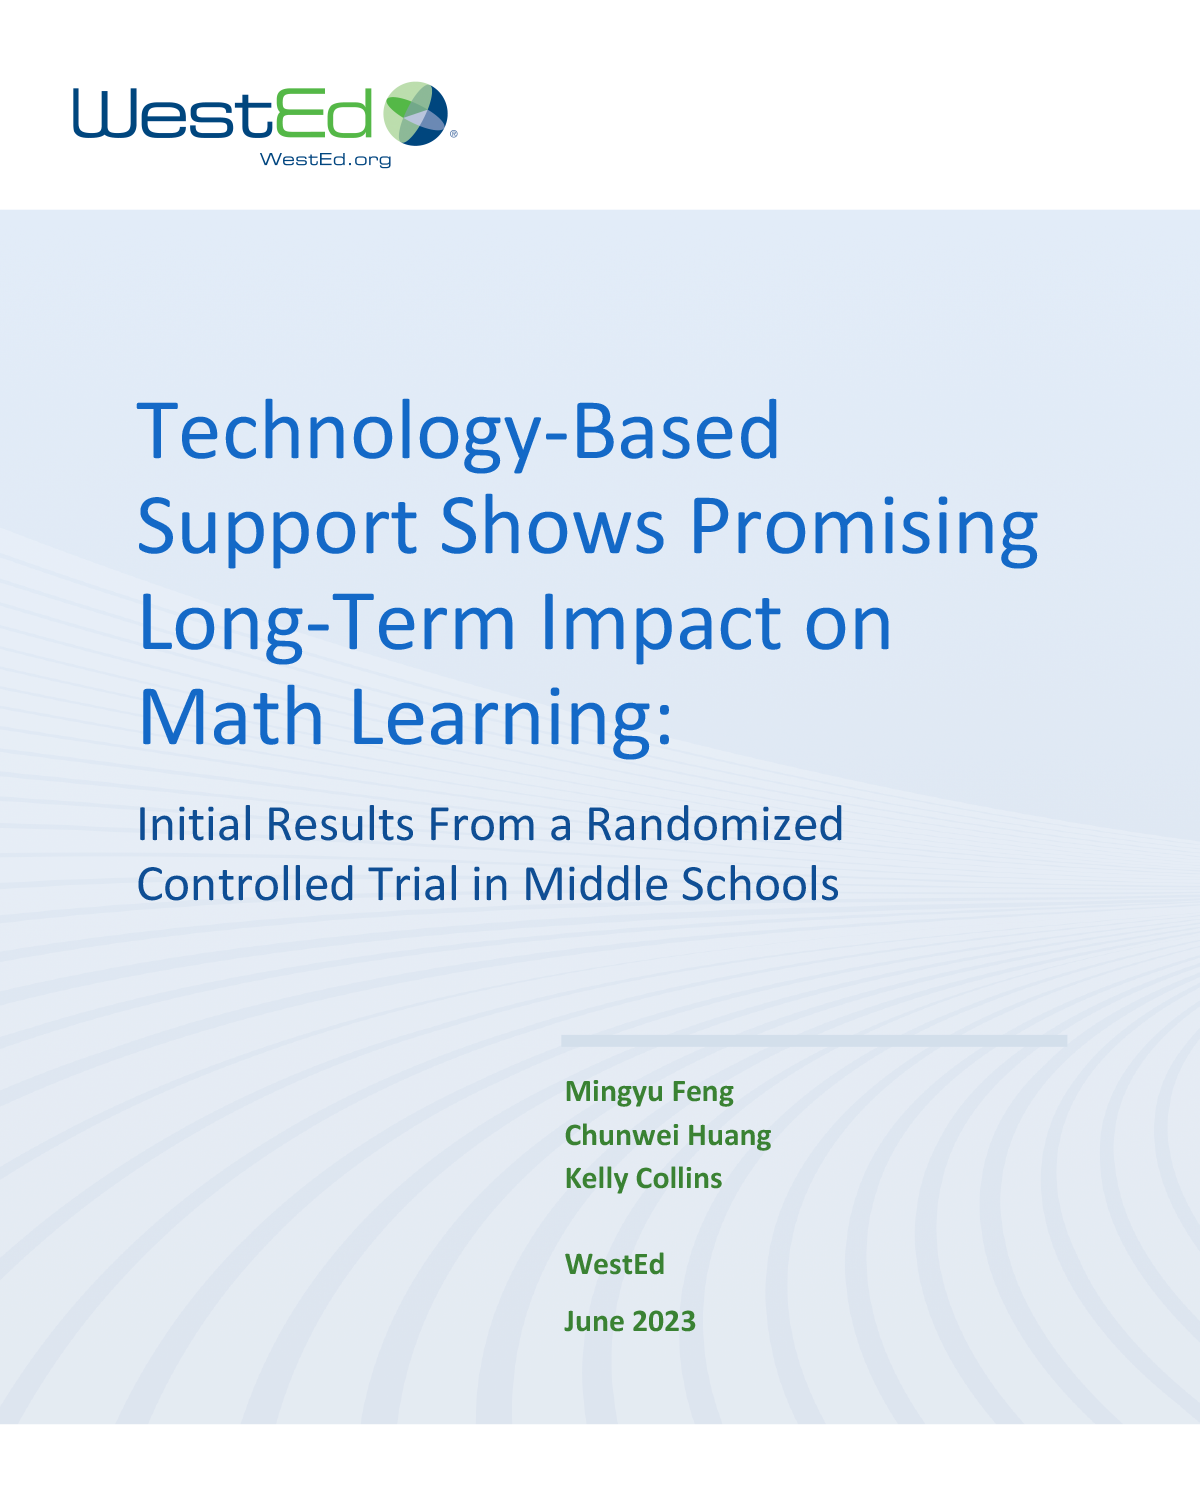 Technology-Based Support Shows Promising Long-Term Impact on Math Learning: Initial Results from a Randomized Controlled Trial in Middle Schools